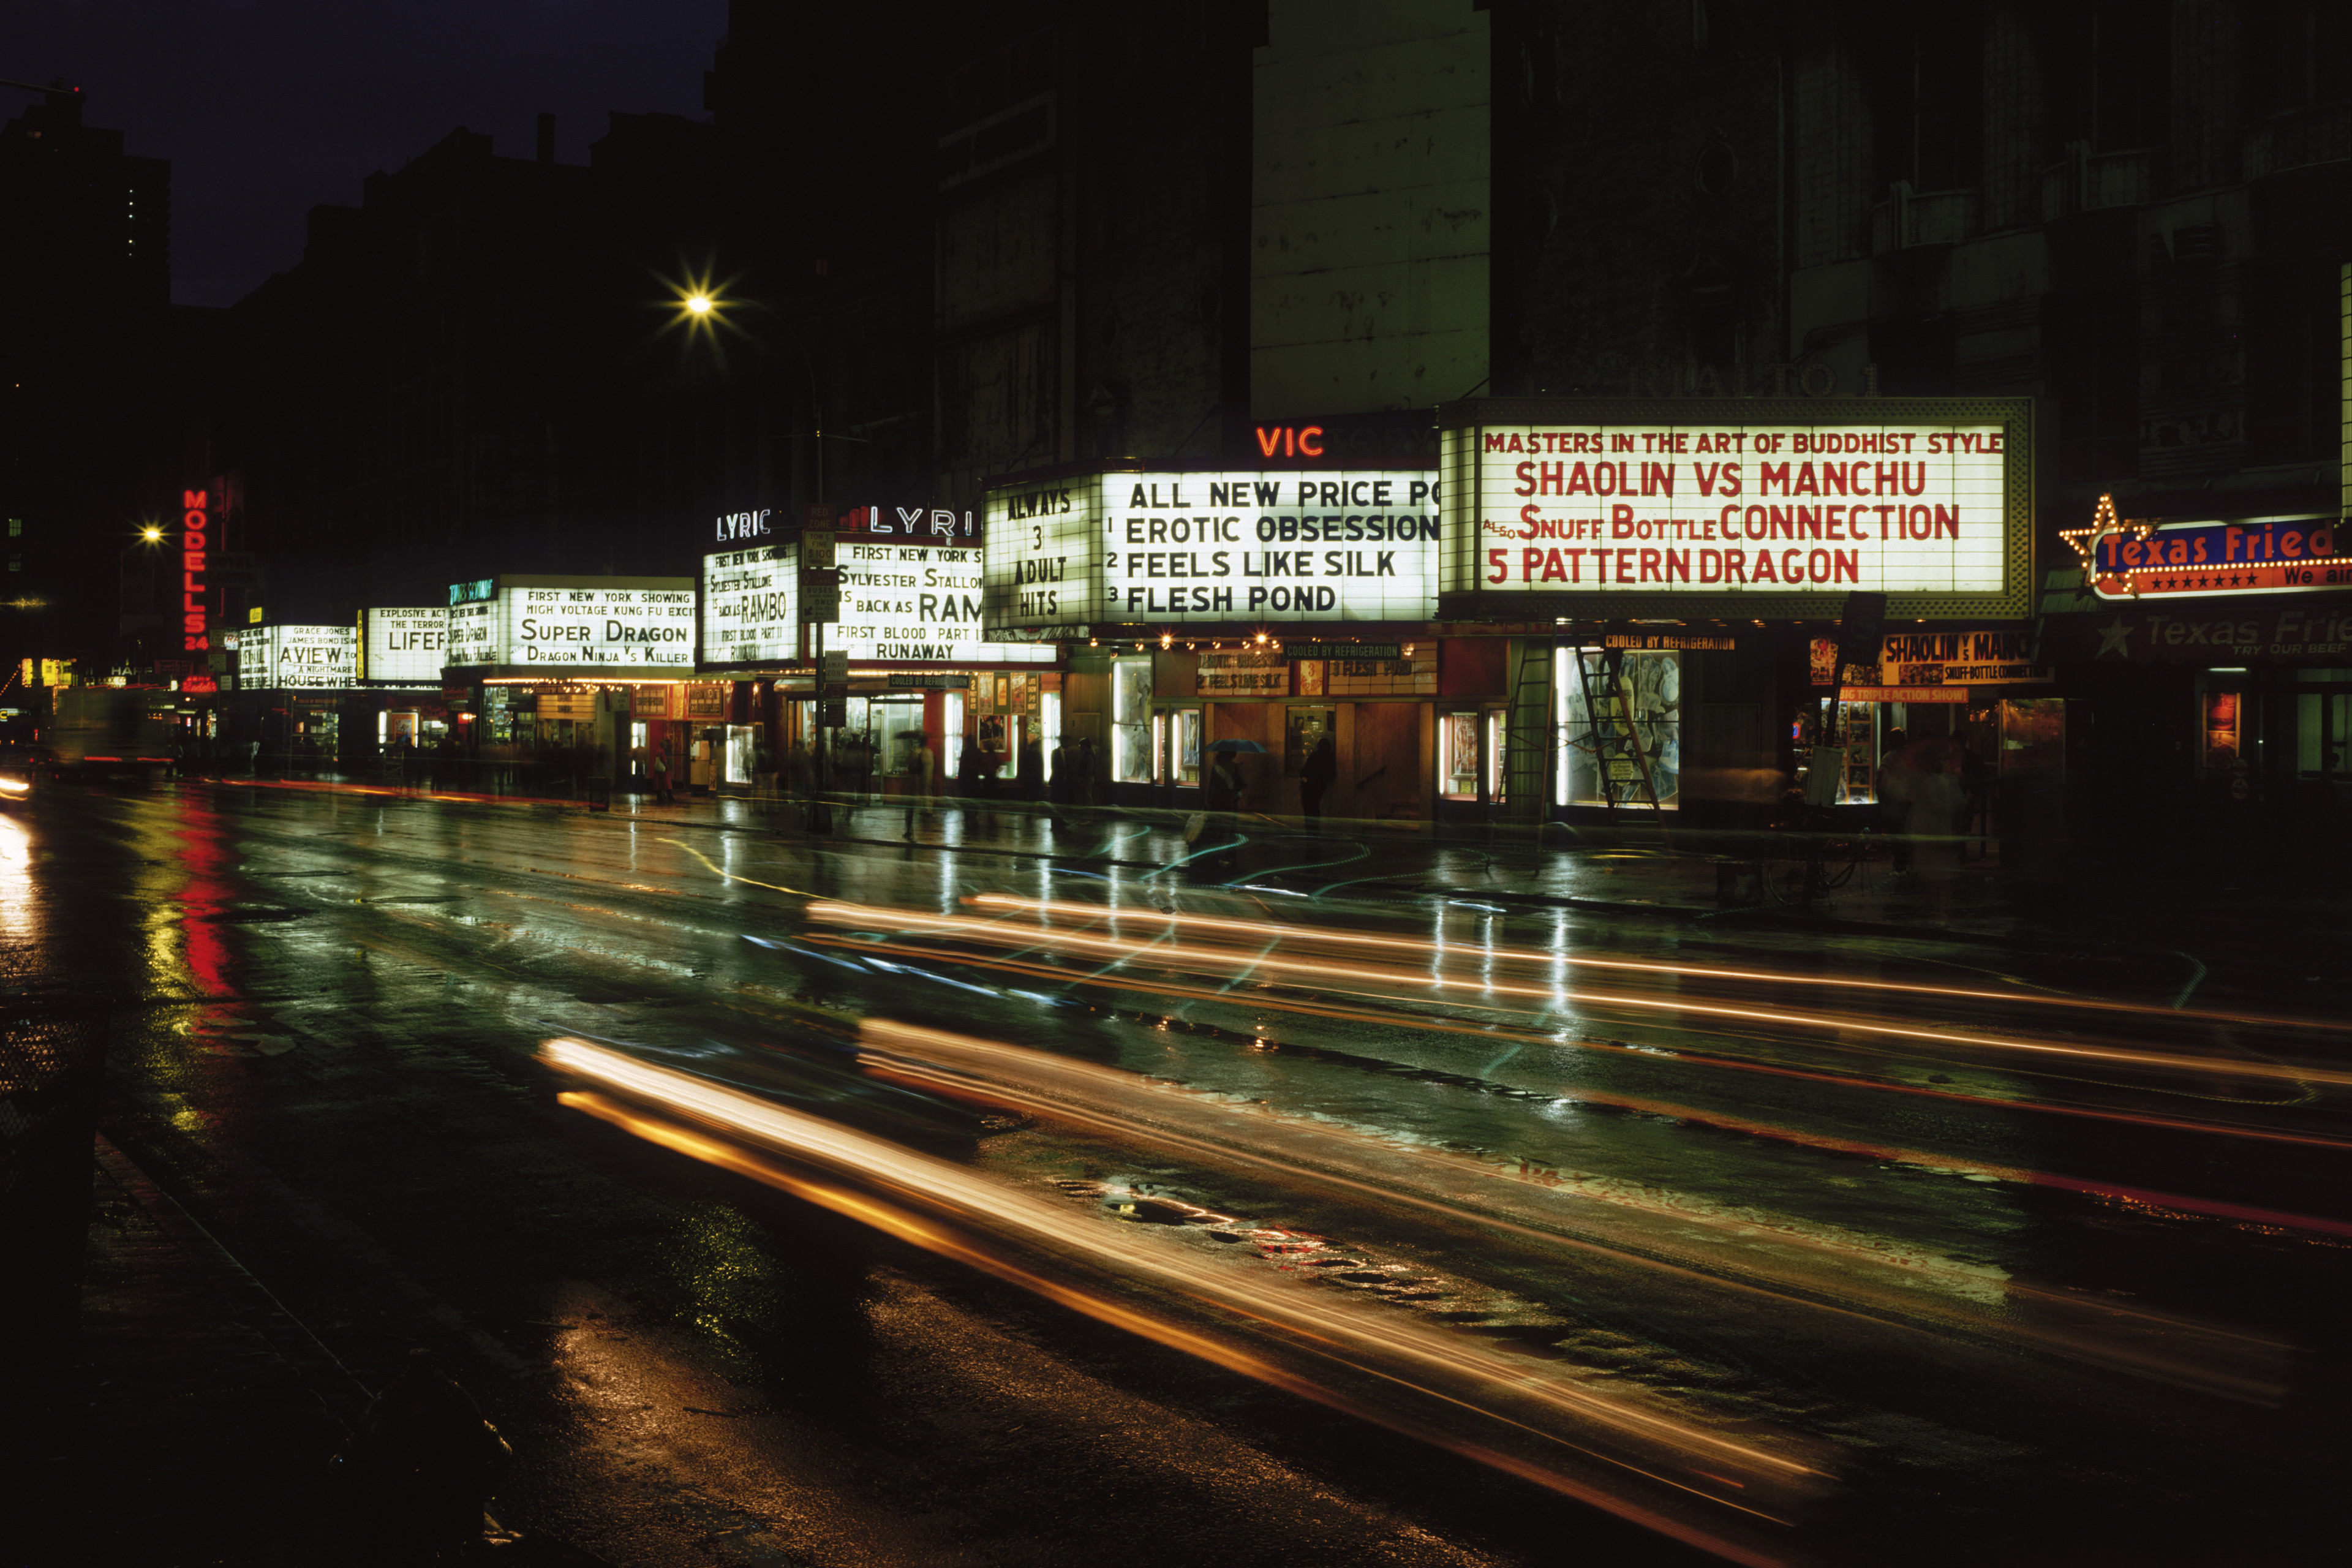 Cinema signs advertising adult and martial arts films on 42nd Street, New York, circa 1977. | Source: Getty Images